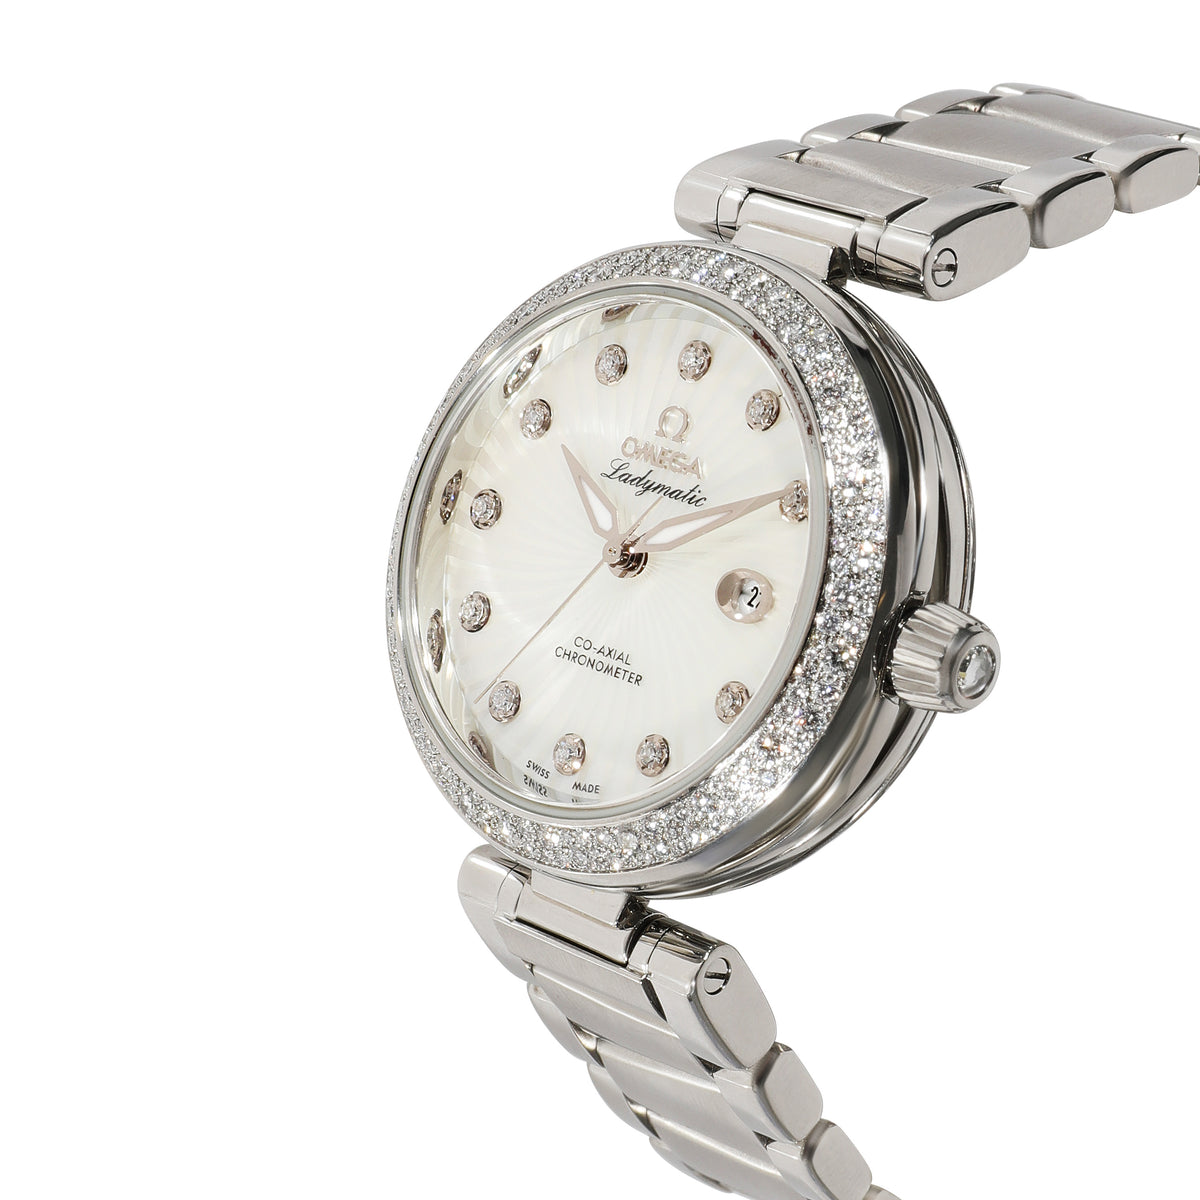 Omega Ladymatic 425.35.34.20.55.001 Women's Watch in  Stainless Steel